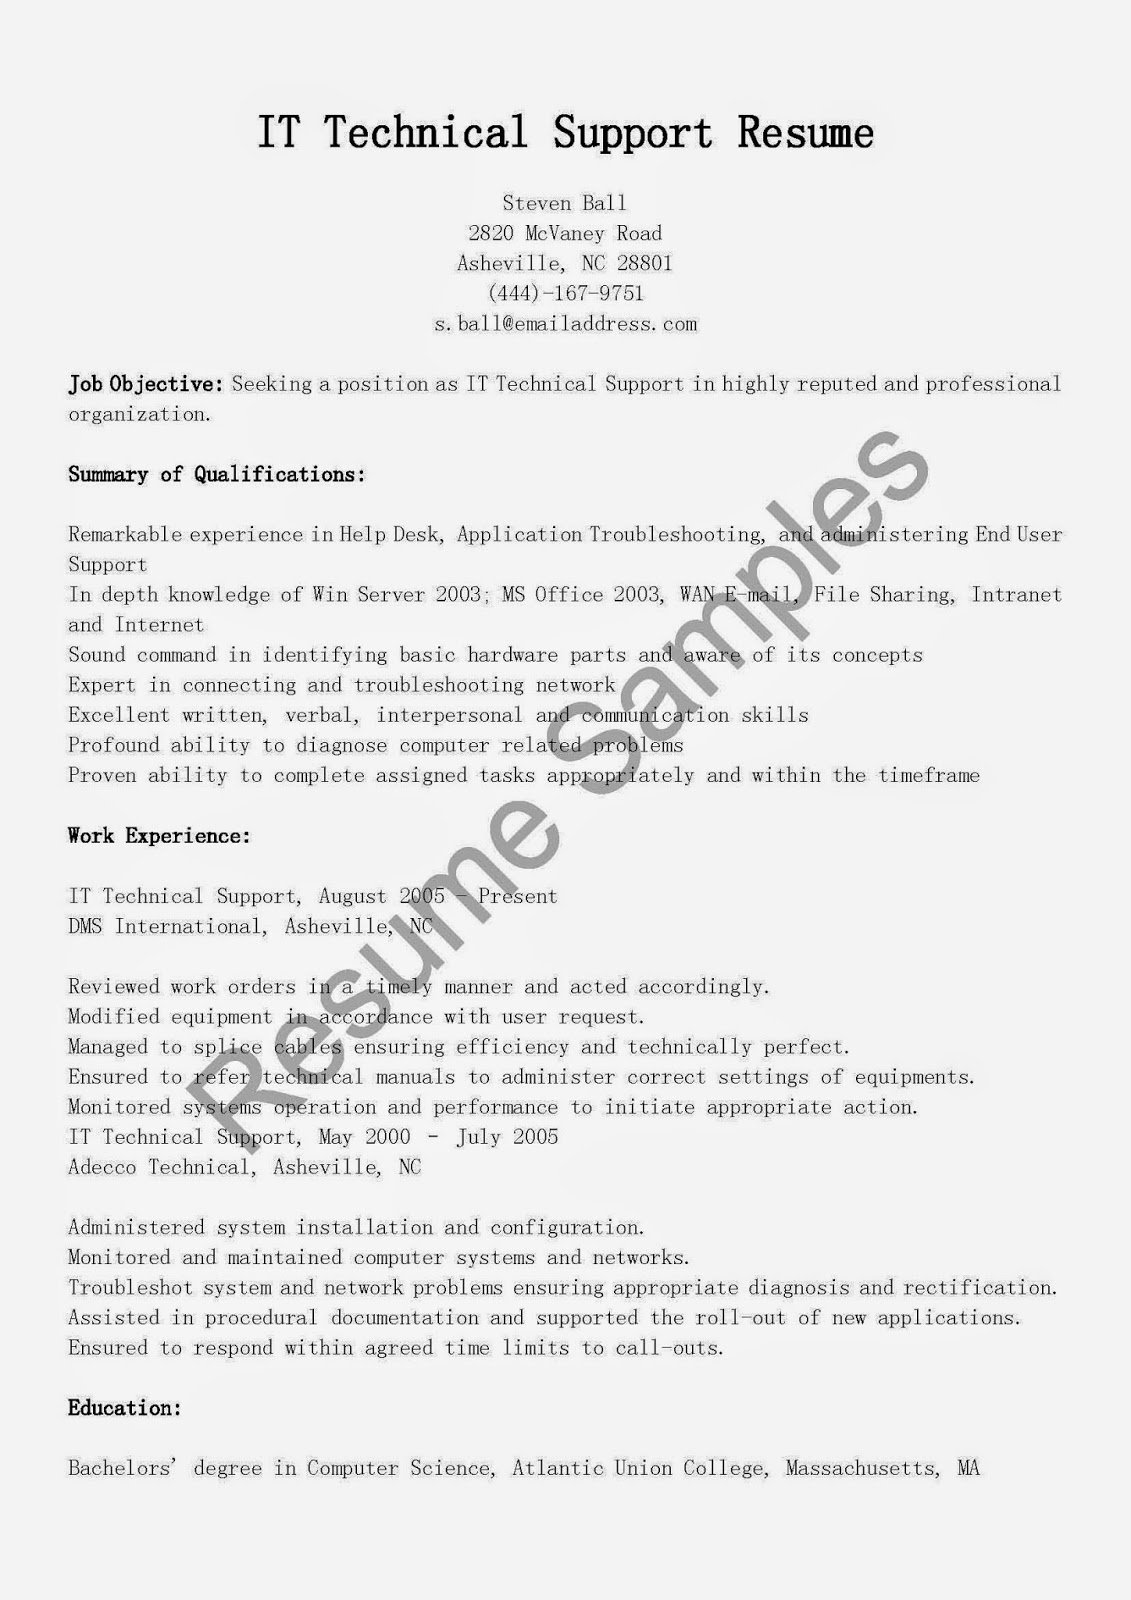 Resume Samples It Technical Support Resume Sample